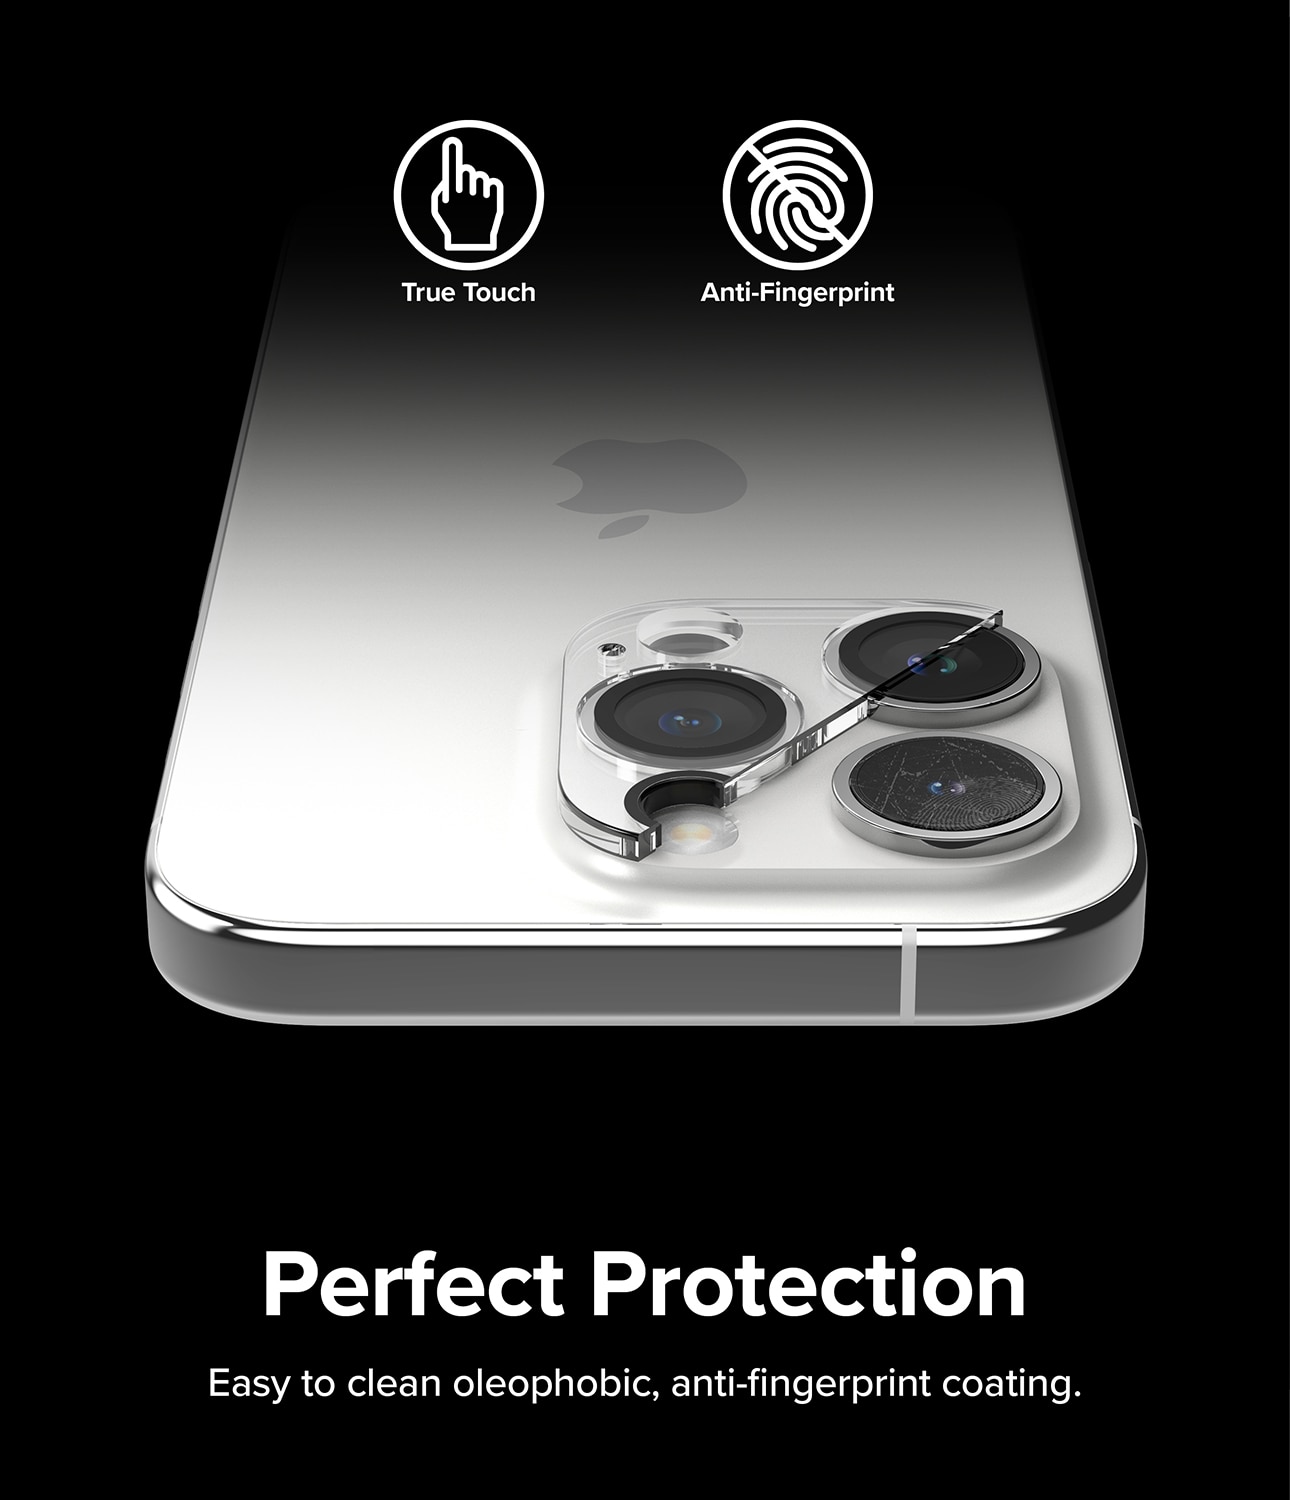 Camera Protector Glass iPhone 15 Pro (2-pack)